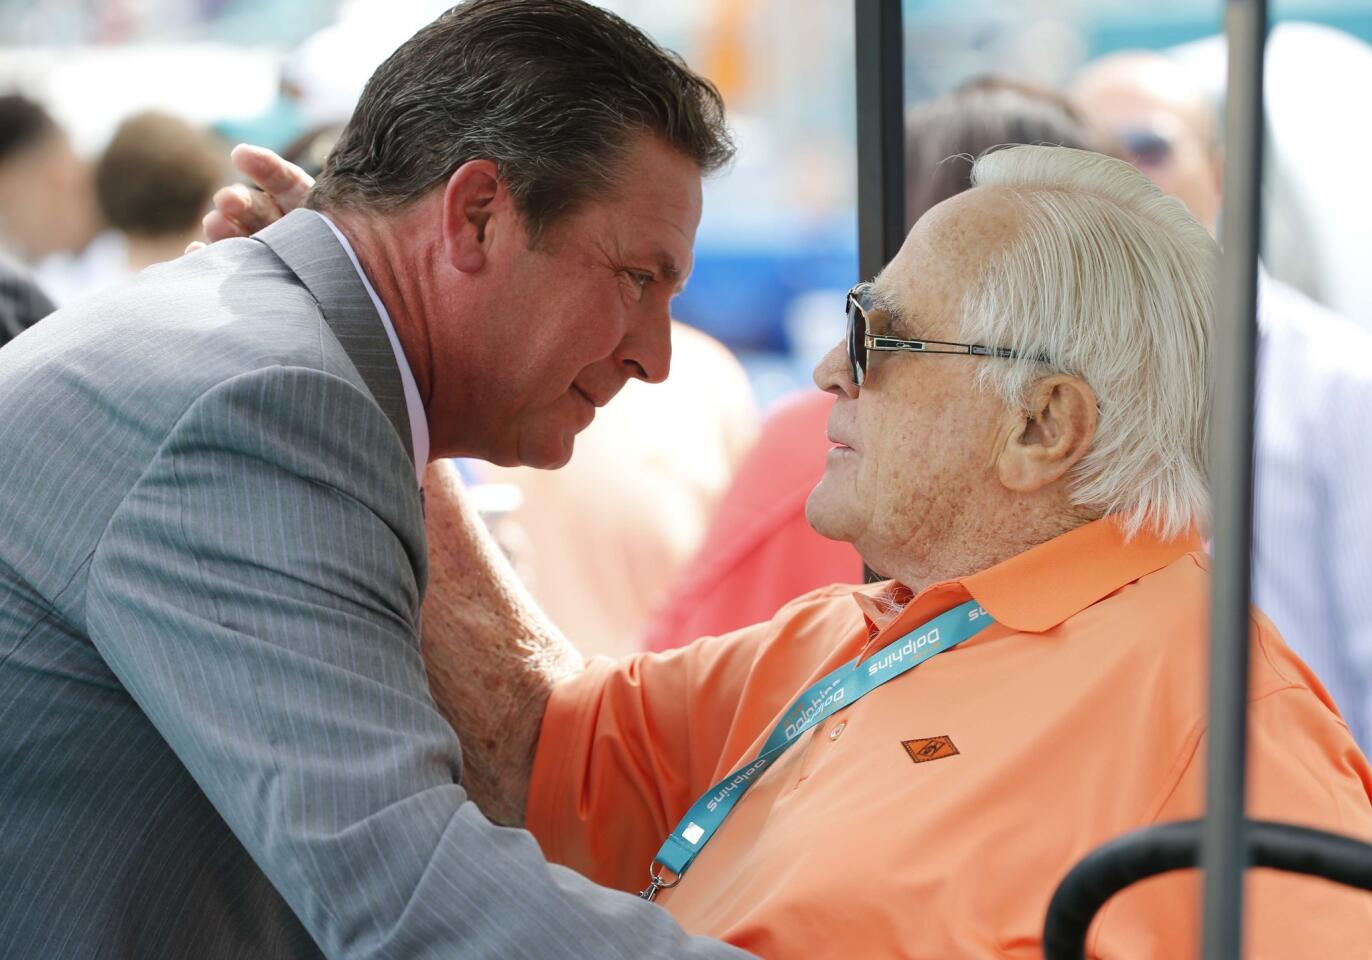 Former Miami Dolphins quarterback Dan Marino, left, greets former head coach Don Shula on the field before an NFL football game against the New England Patriots, Sunday, Jan. 3, 2016 in Miami Gardens, Fla. (AP Photo/Wilfredo Lee)